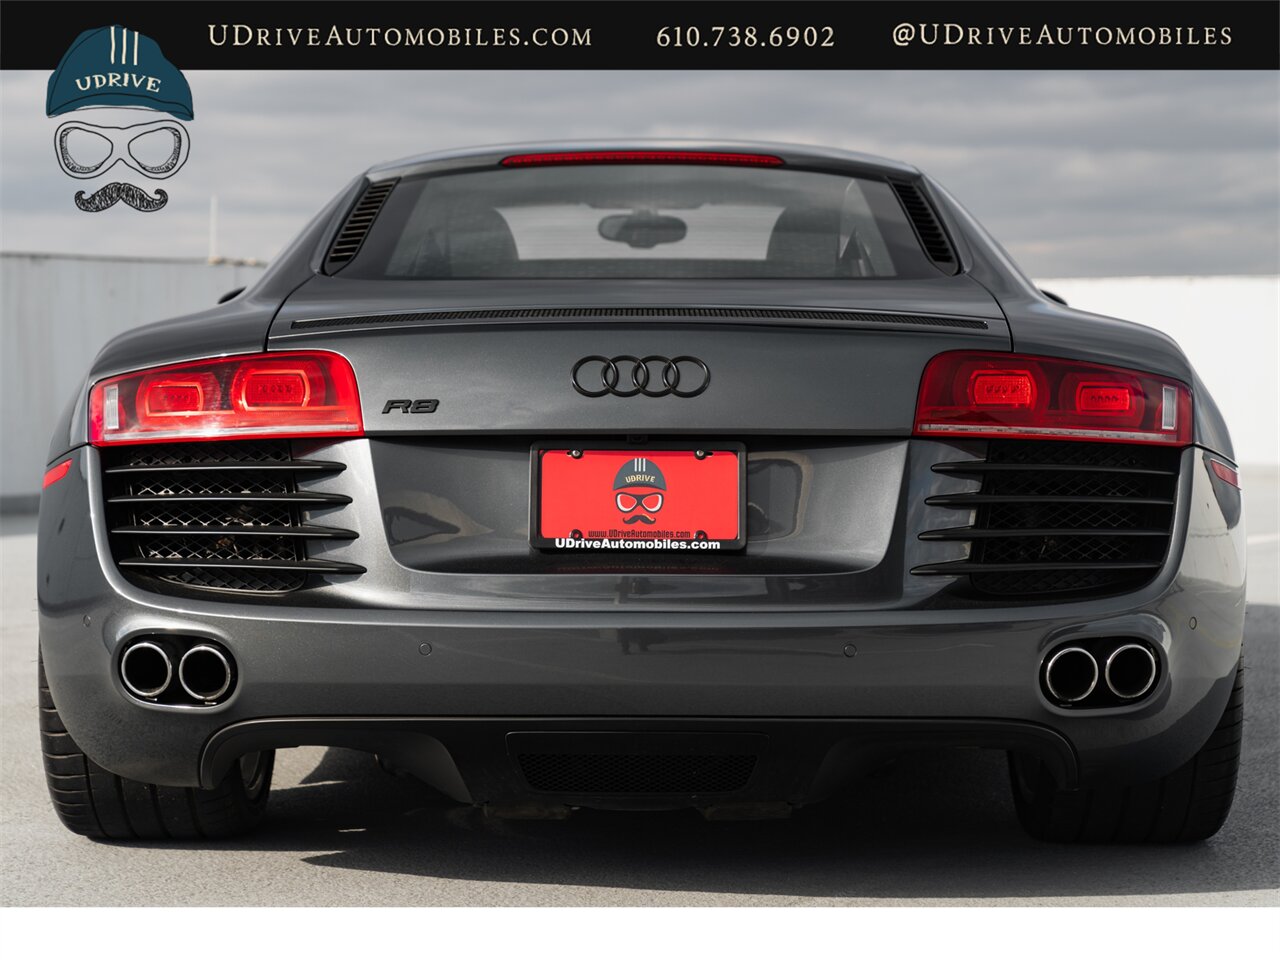 2009 Audi R8 Quattro  4.2 V8 6 Speed Manual 15k Miles - Photo 24 - West Chester, PA 19382